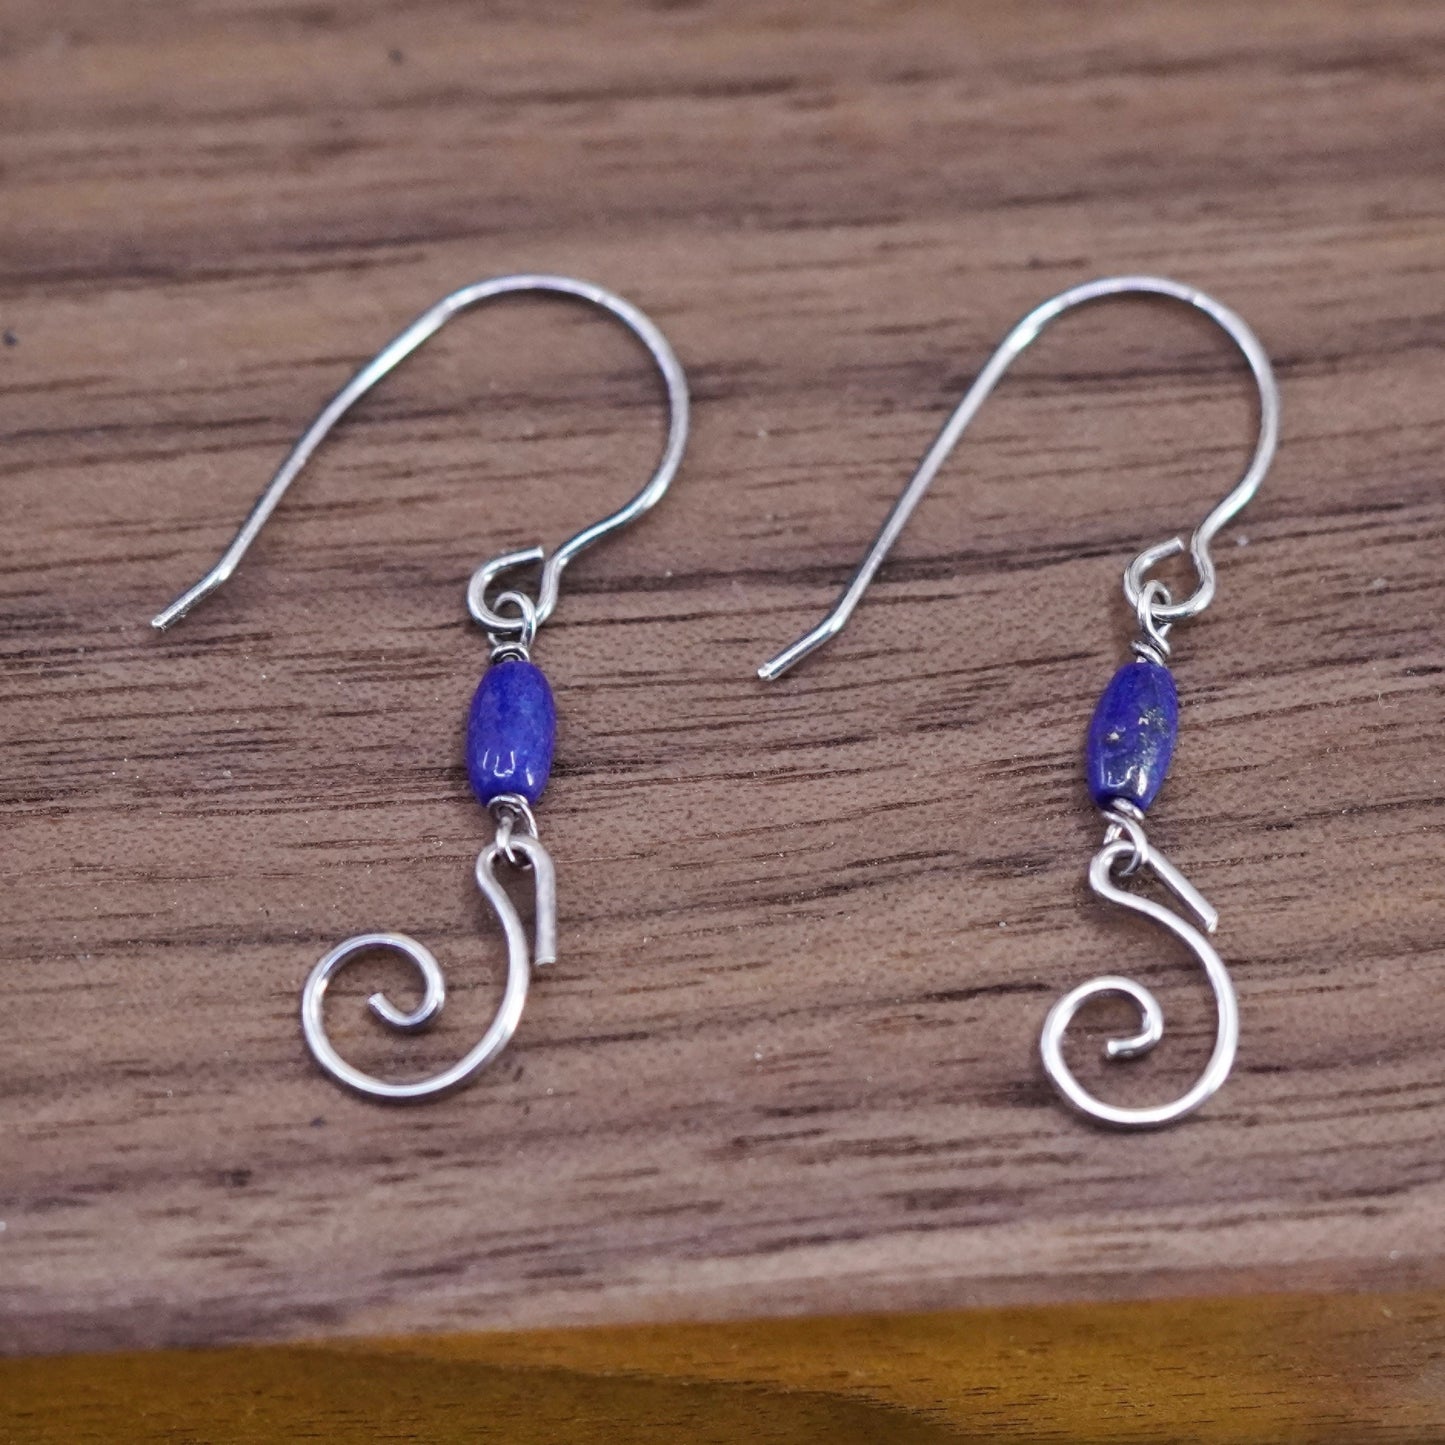 Vintage sterling silver handmade earrings, 925 swirly drops with lapis